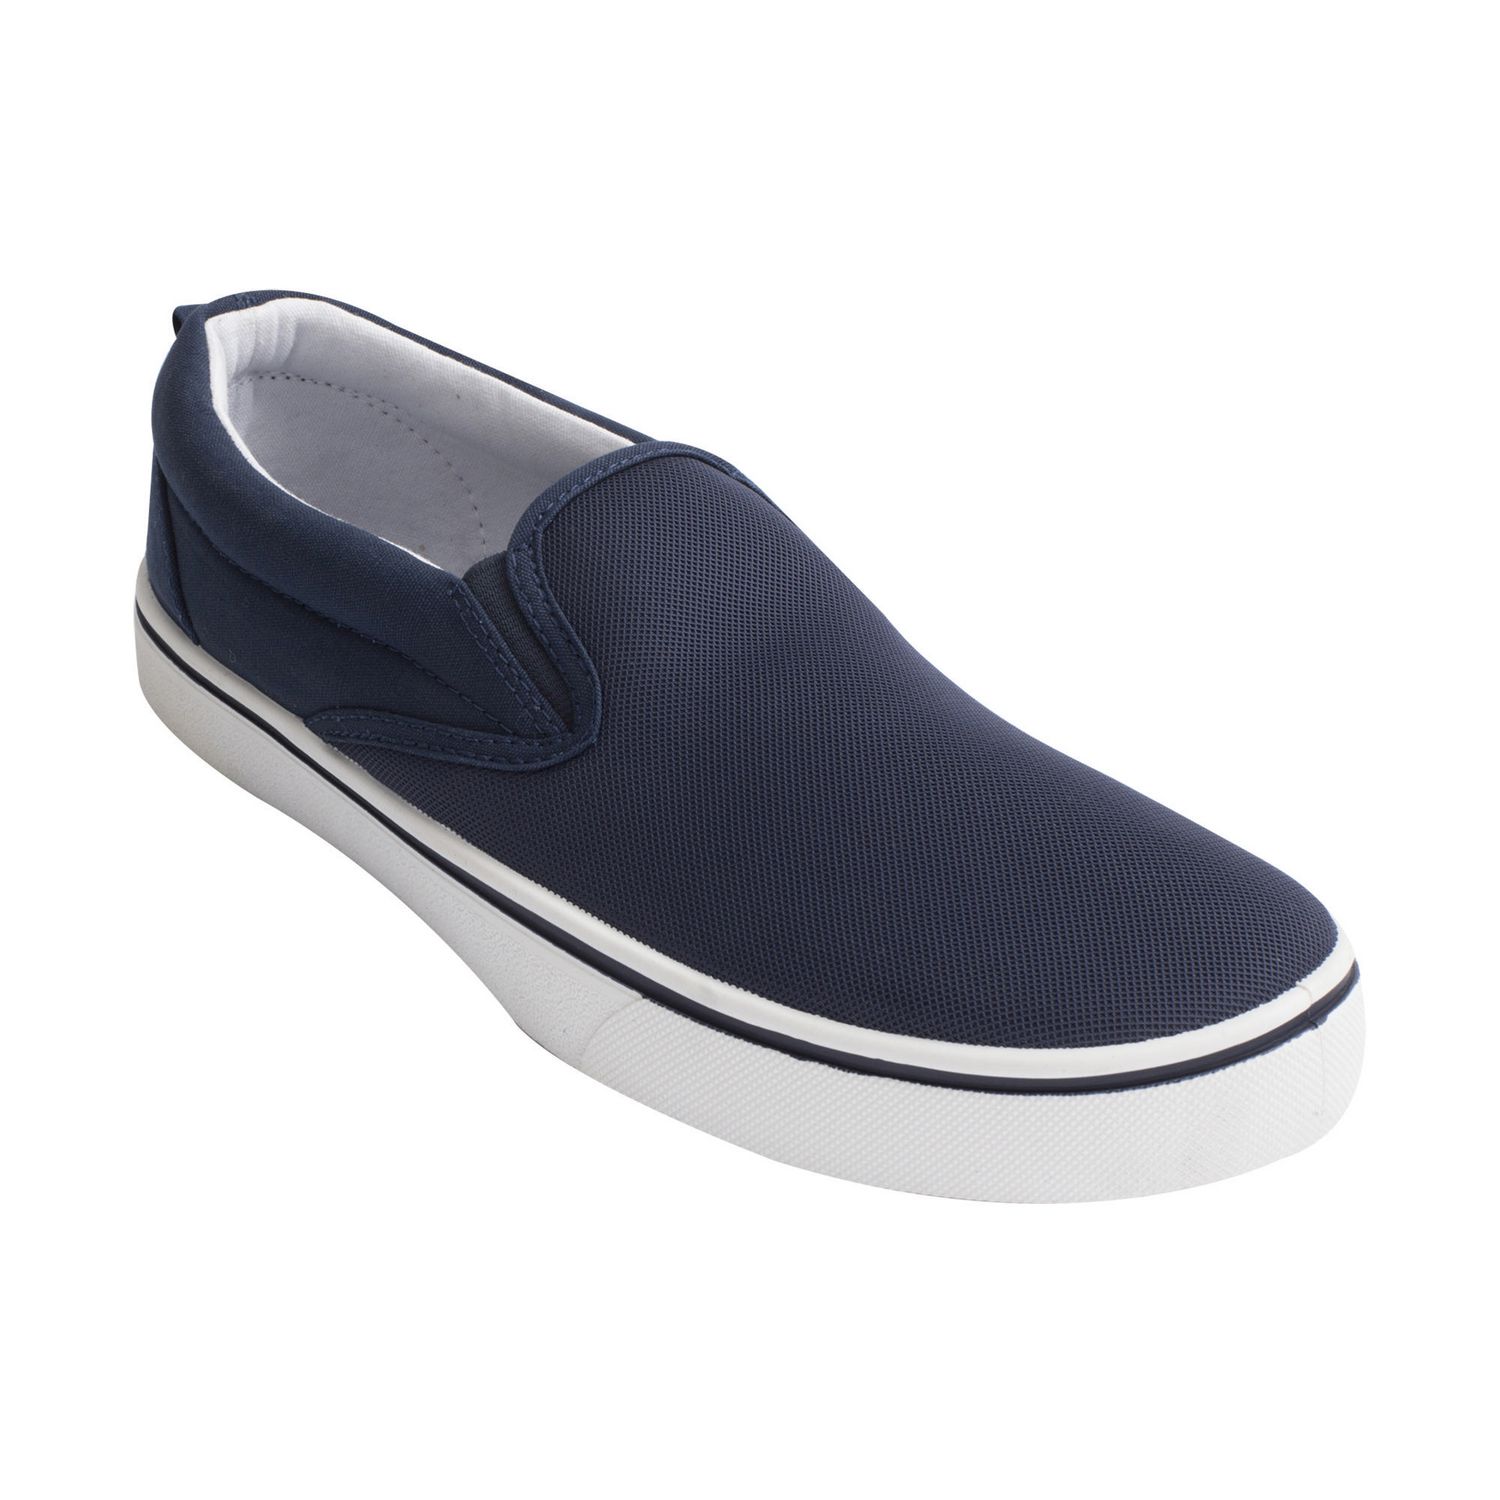 George Men’s Slip-On Casual Shoes | Walmart Canada